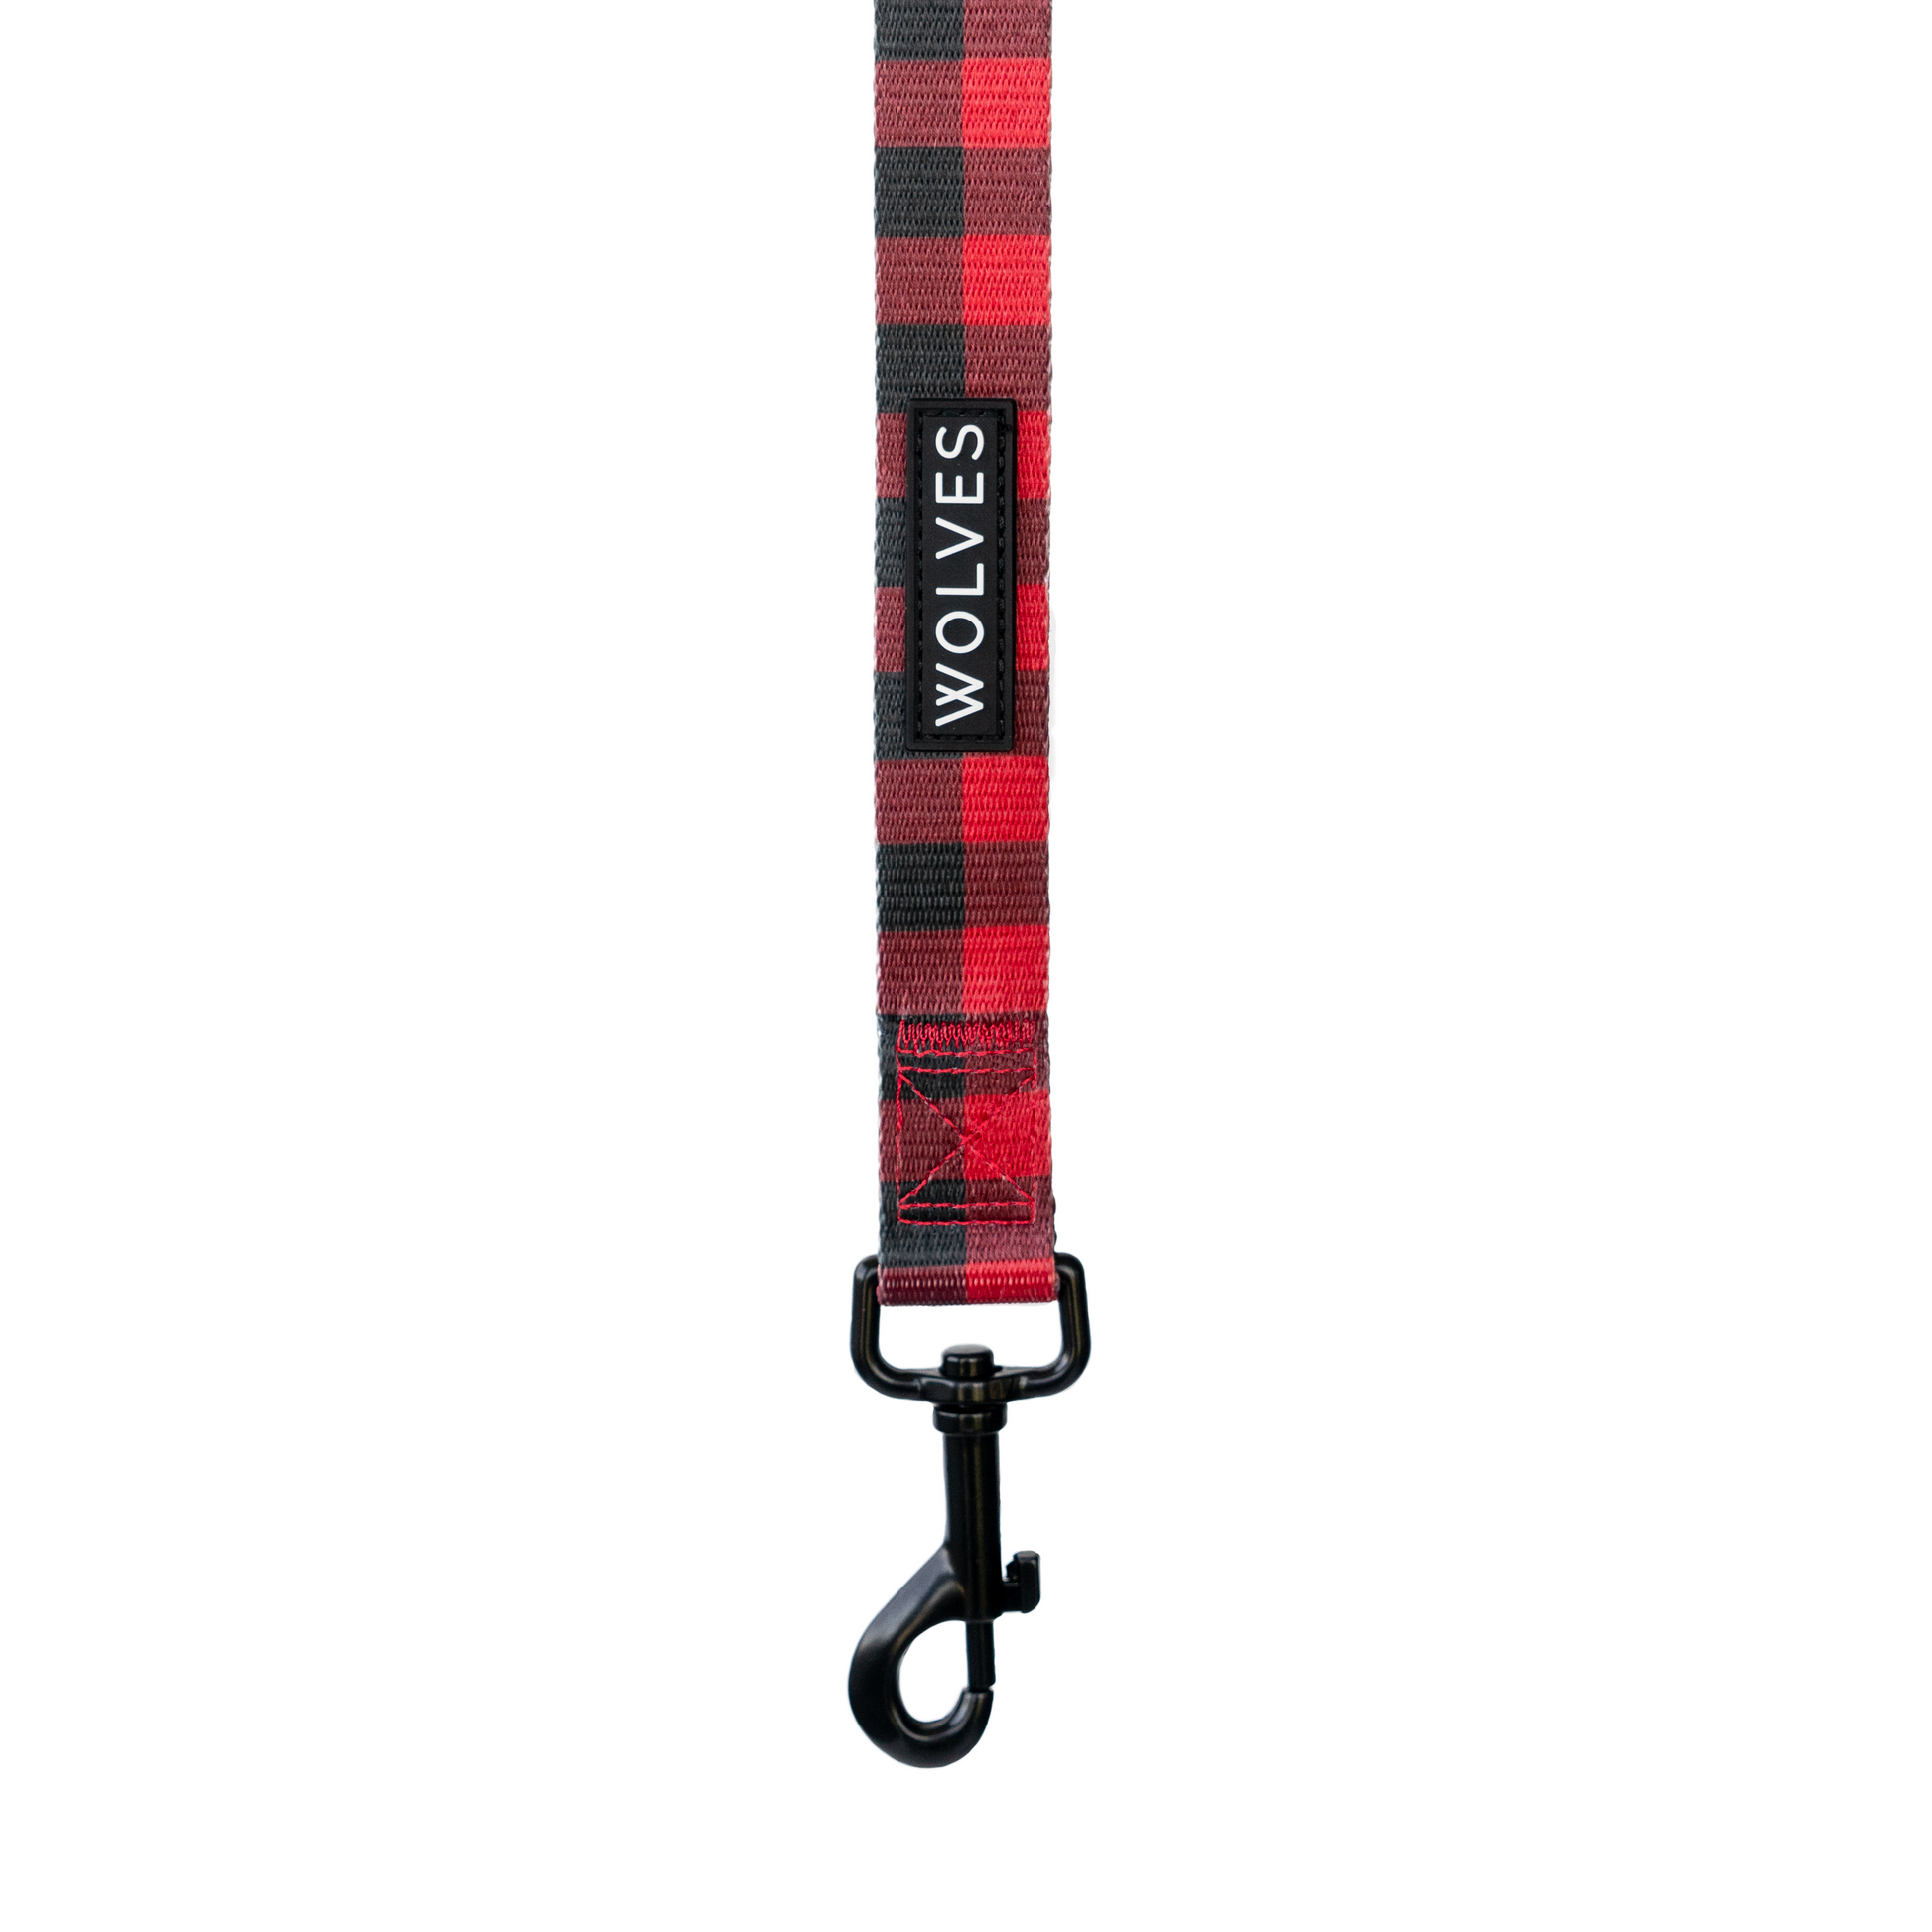 Red & Black checked dog leash with "Wolves" logo.